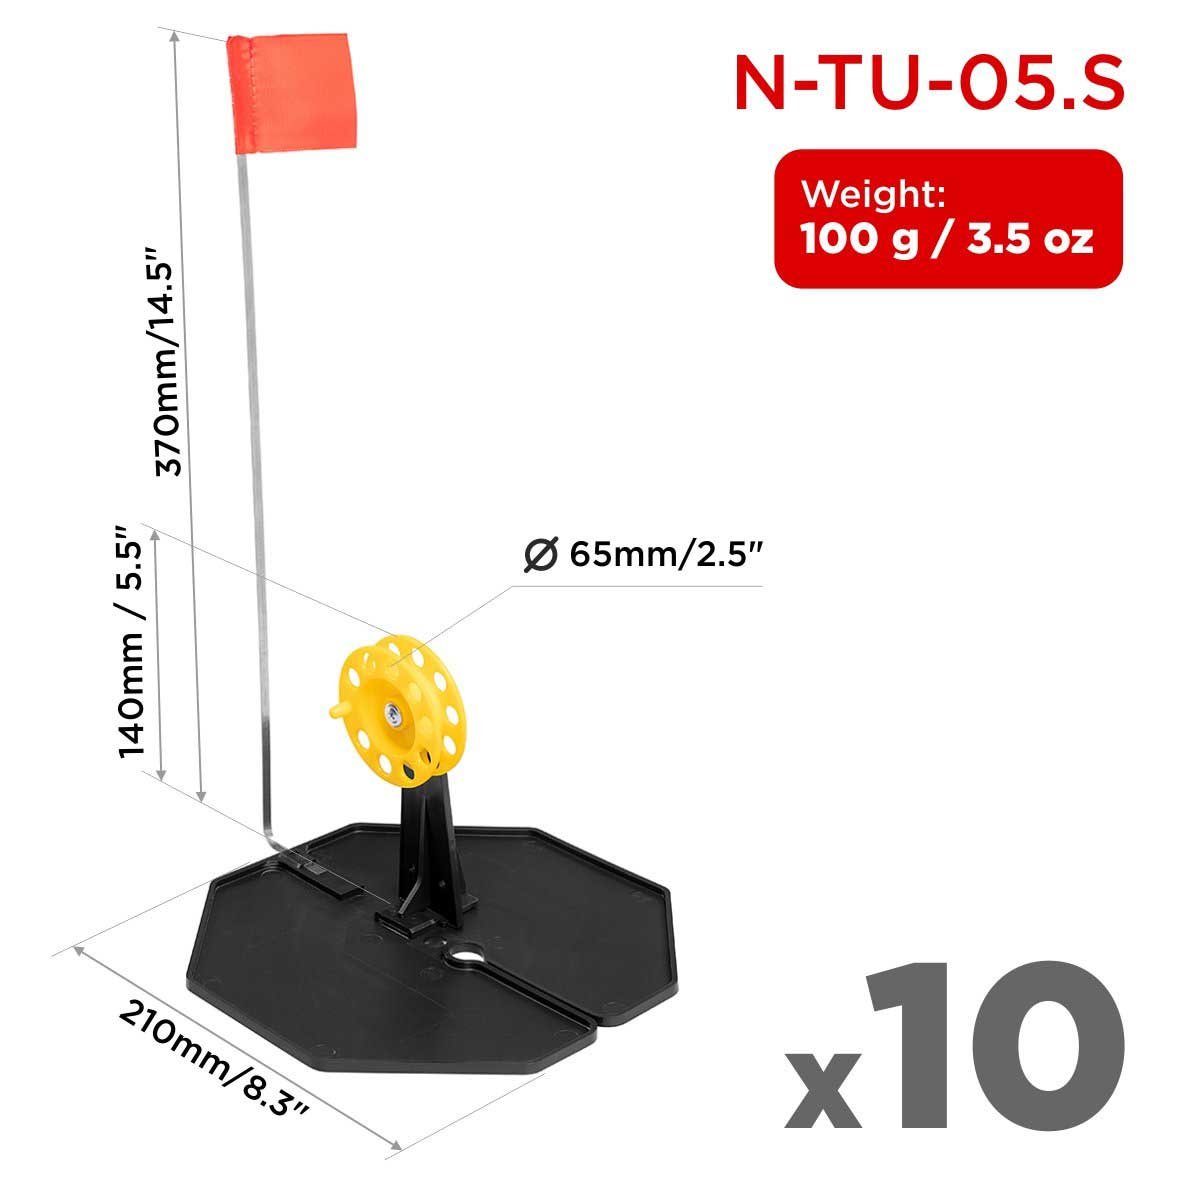 Set of Tip-up Pop-Up Integrated Hole-Cover Easy to Clip N-Tu-05. Each weighs 3.5 oz, the base is 8.3 inches long, the flag shaft is 14.5 inches, the spool diameter is 2.5 inches and its height is 5.5 inches